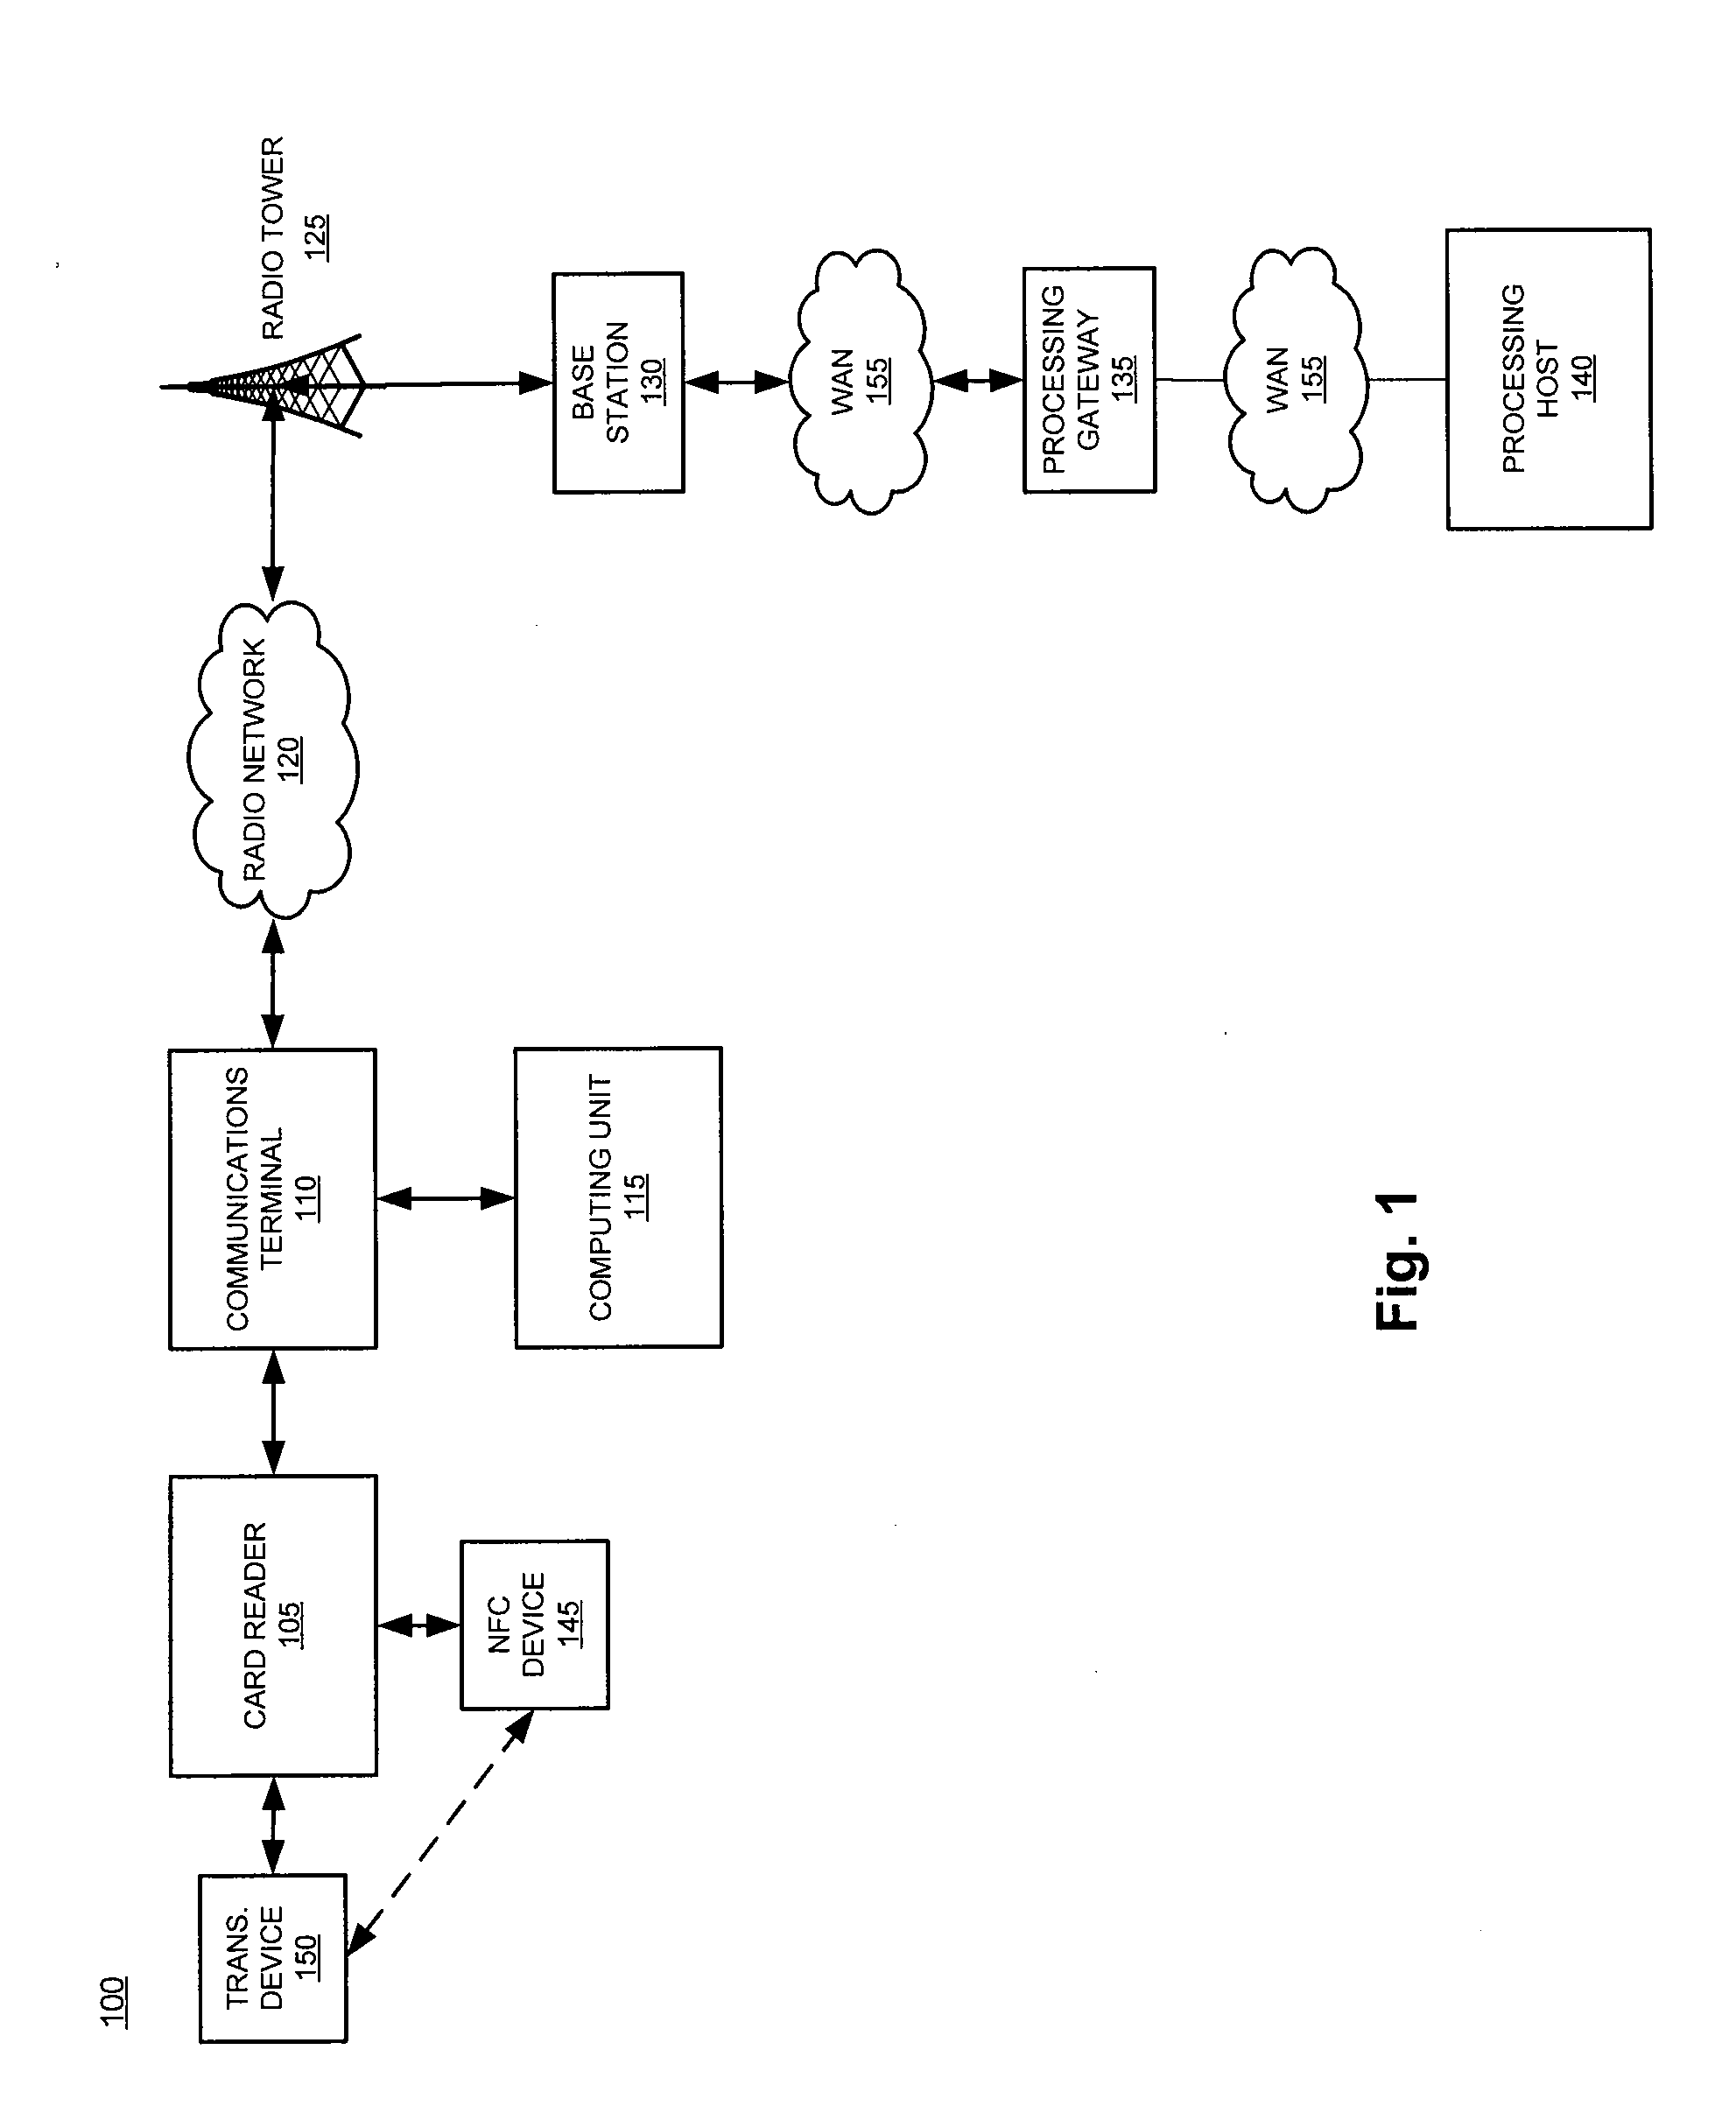 System and method for dynamic configuration of session layer retry logic based on signal quality